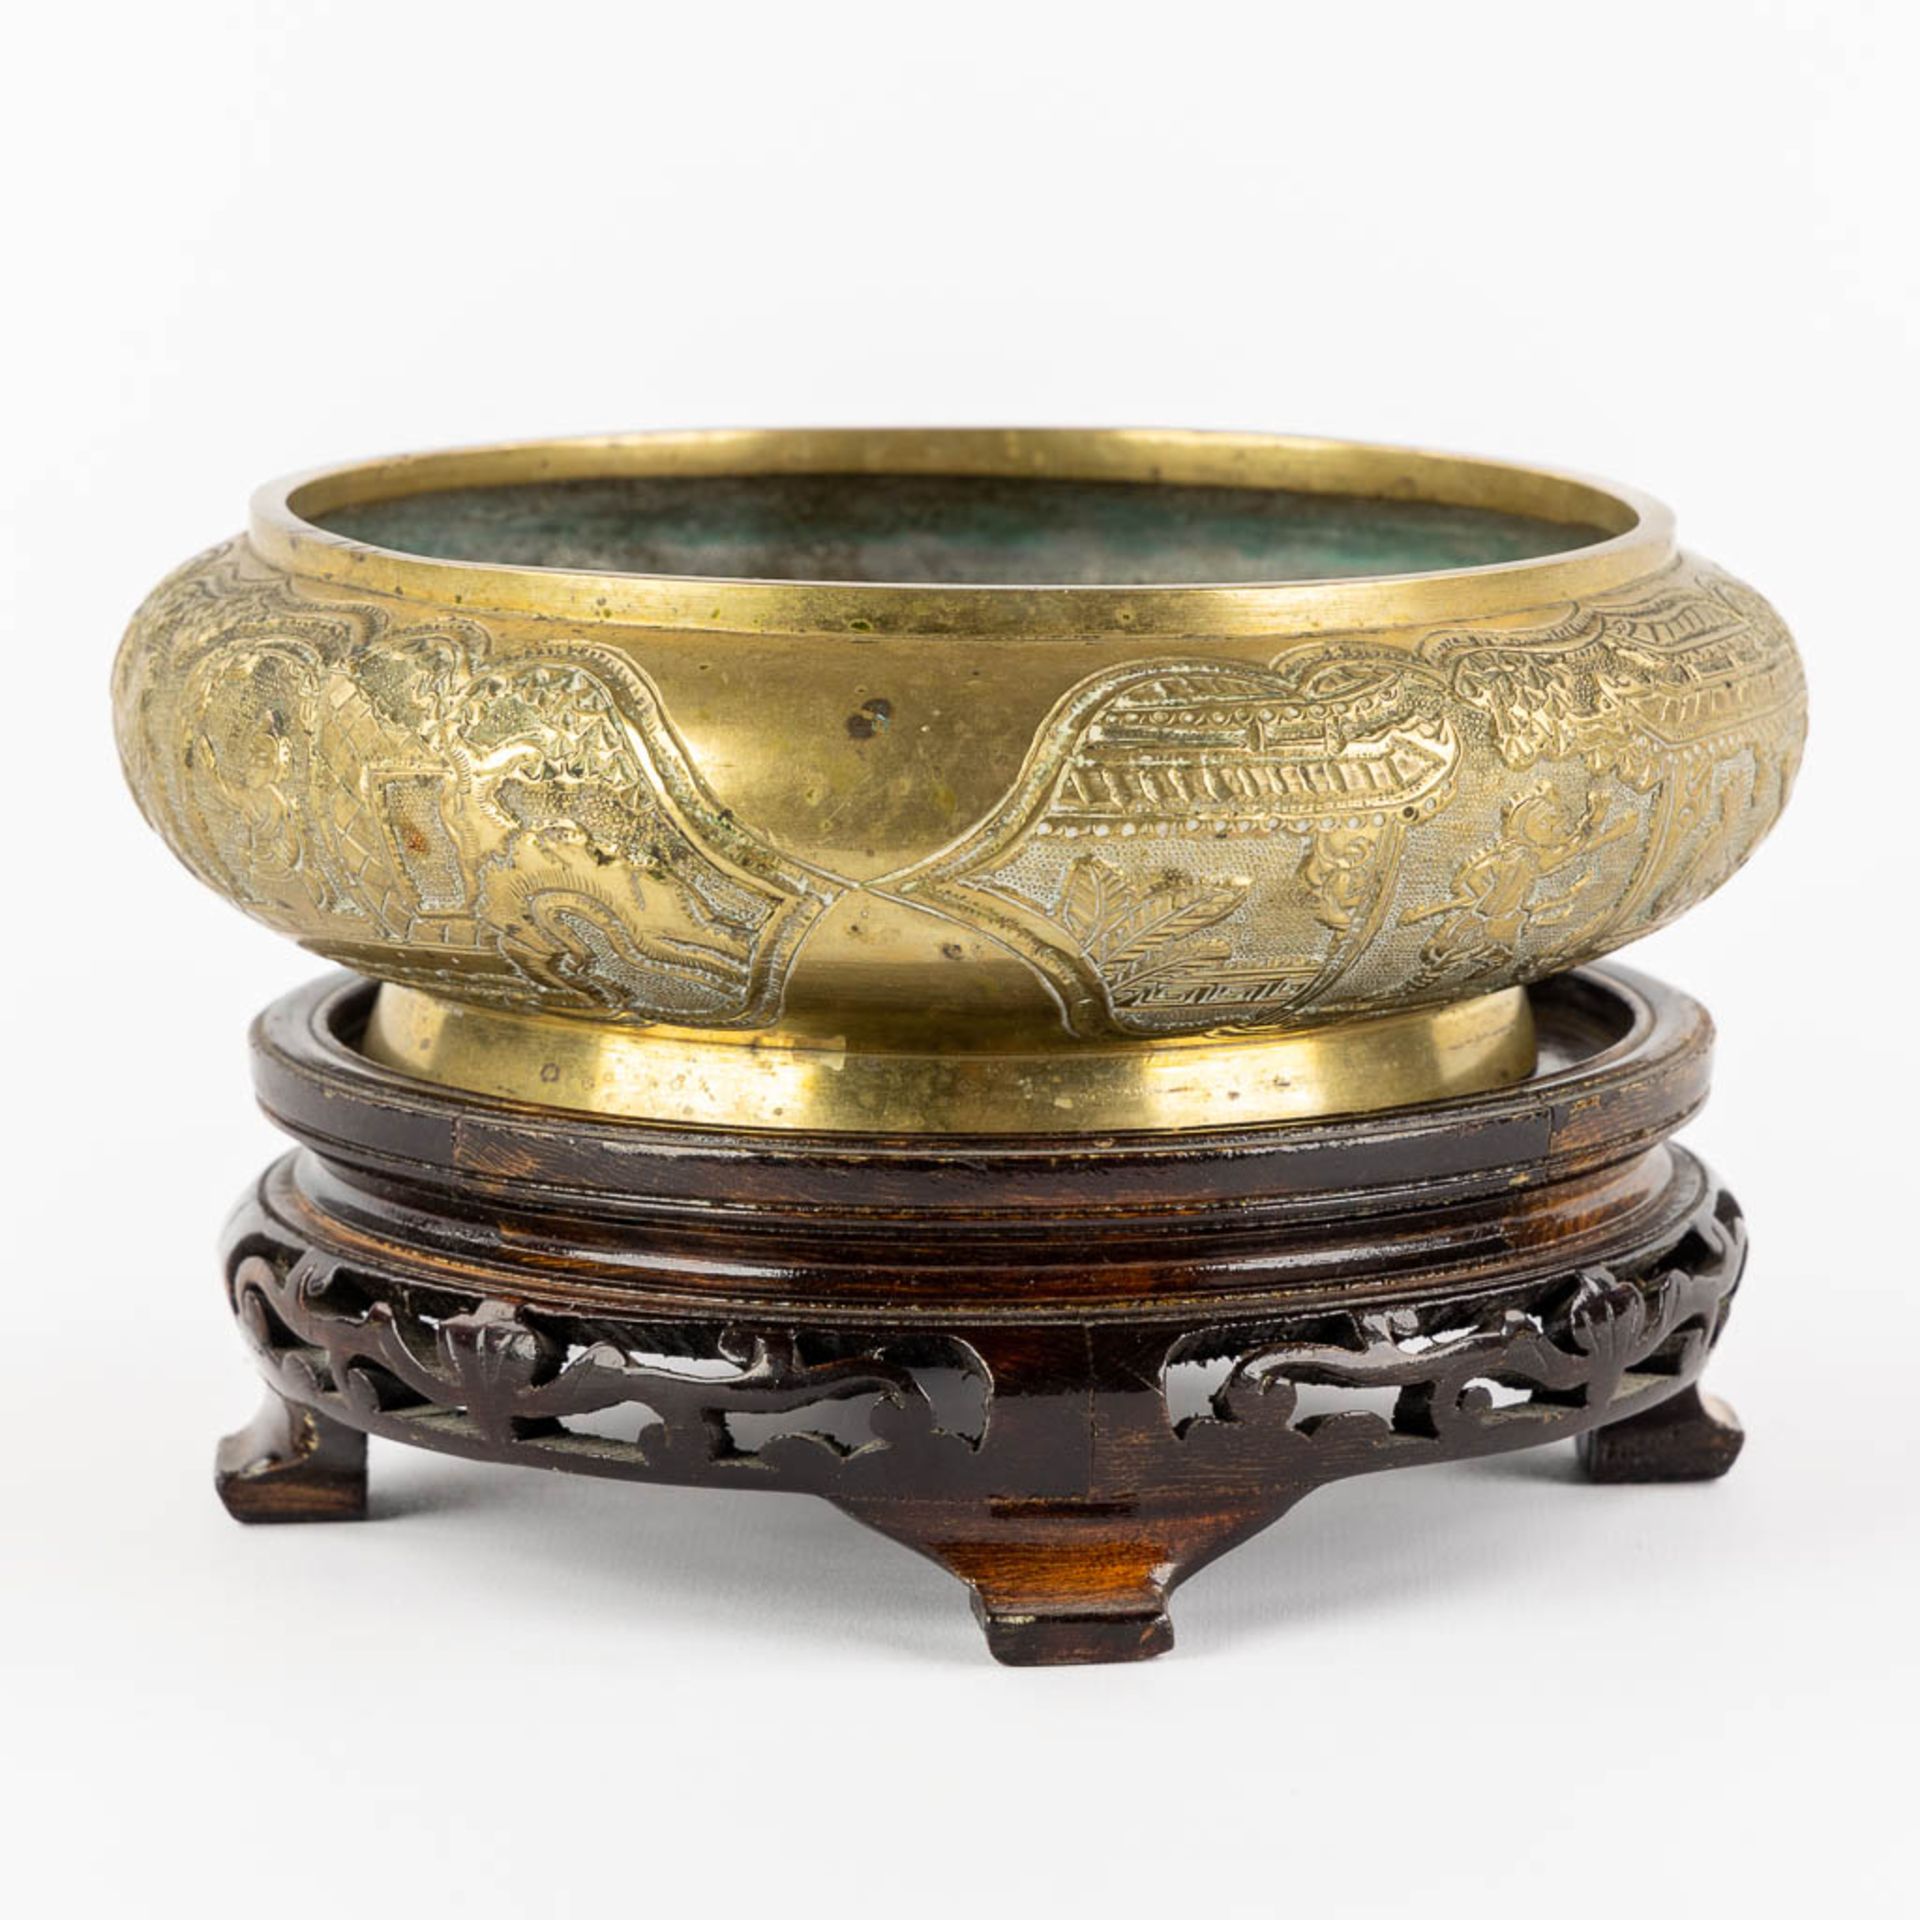 A Chinese bronze insence burner, standing on a wood base. (H:6,5 x D:22 cm) - Image 3 of 13